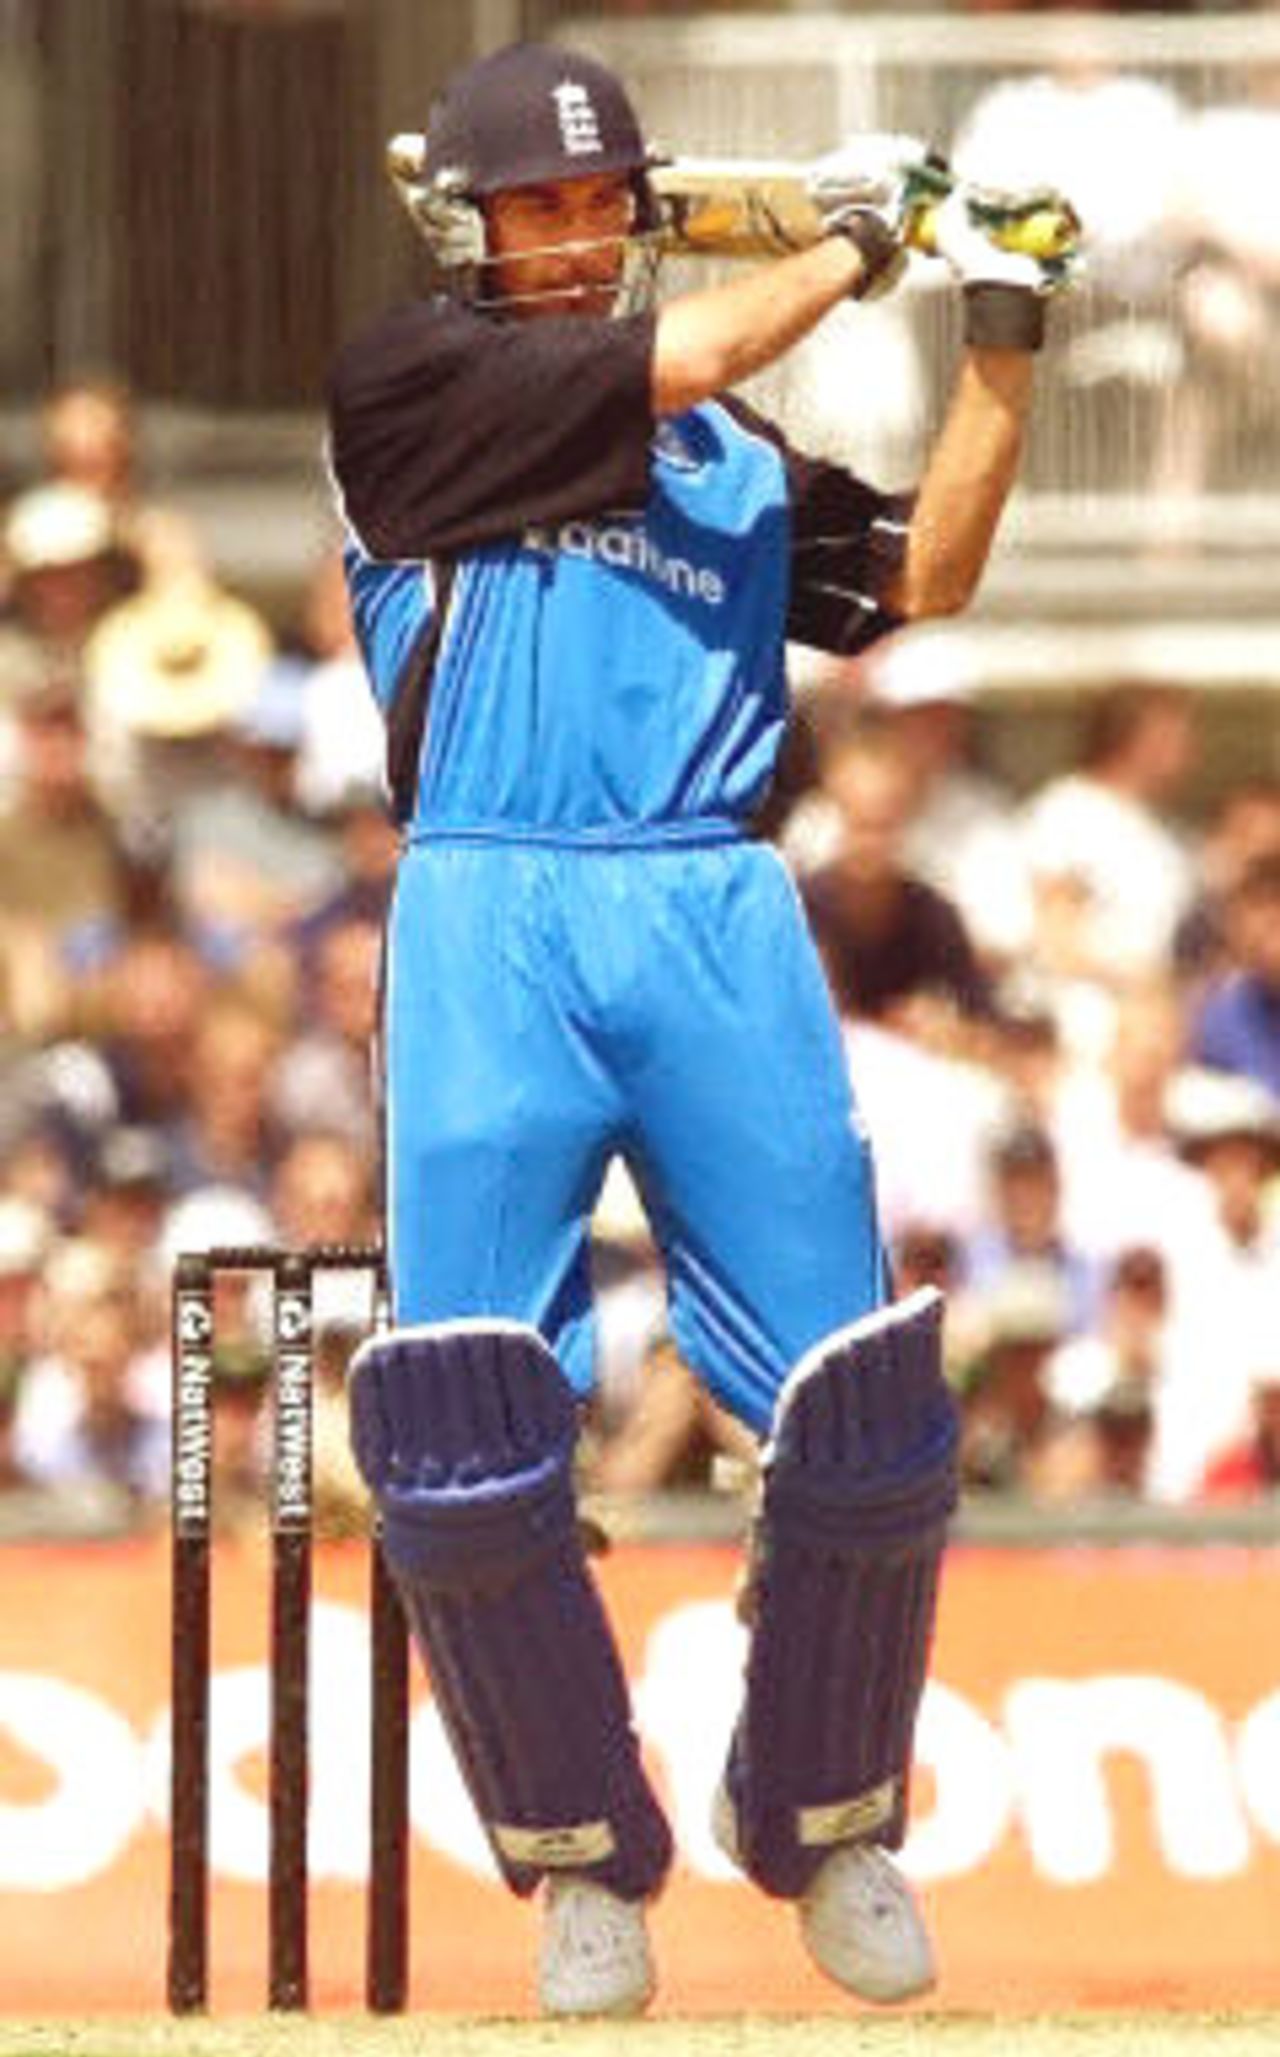 Ben Hollioake hits out against the Australian bowling, 9th ODI at the Oval, 21 June 2001.